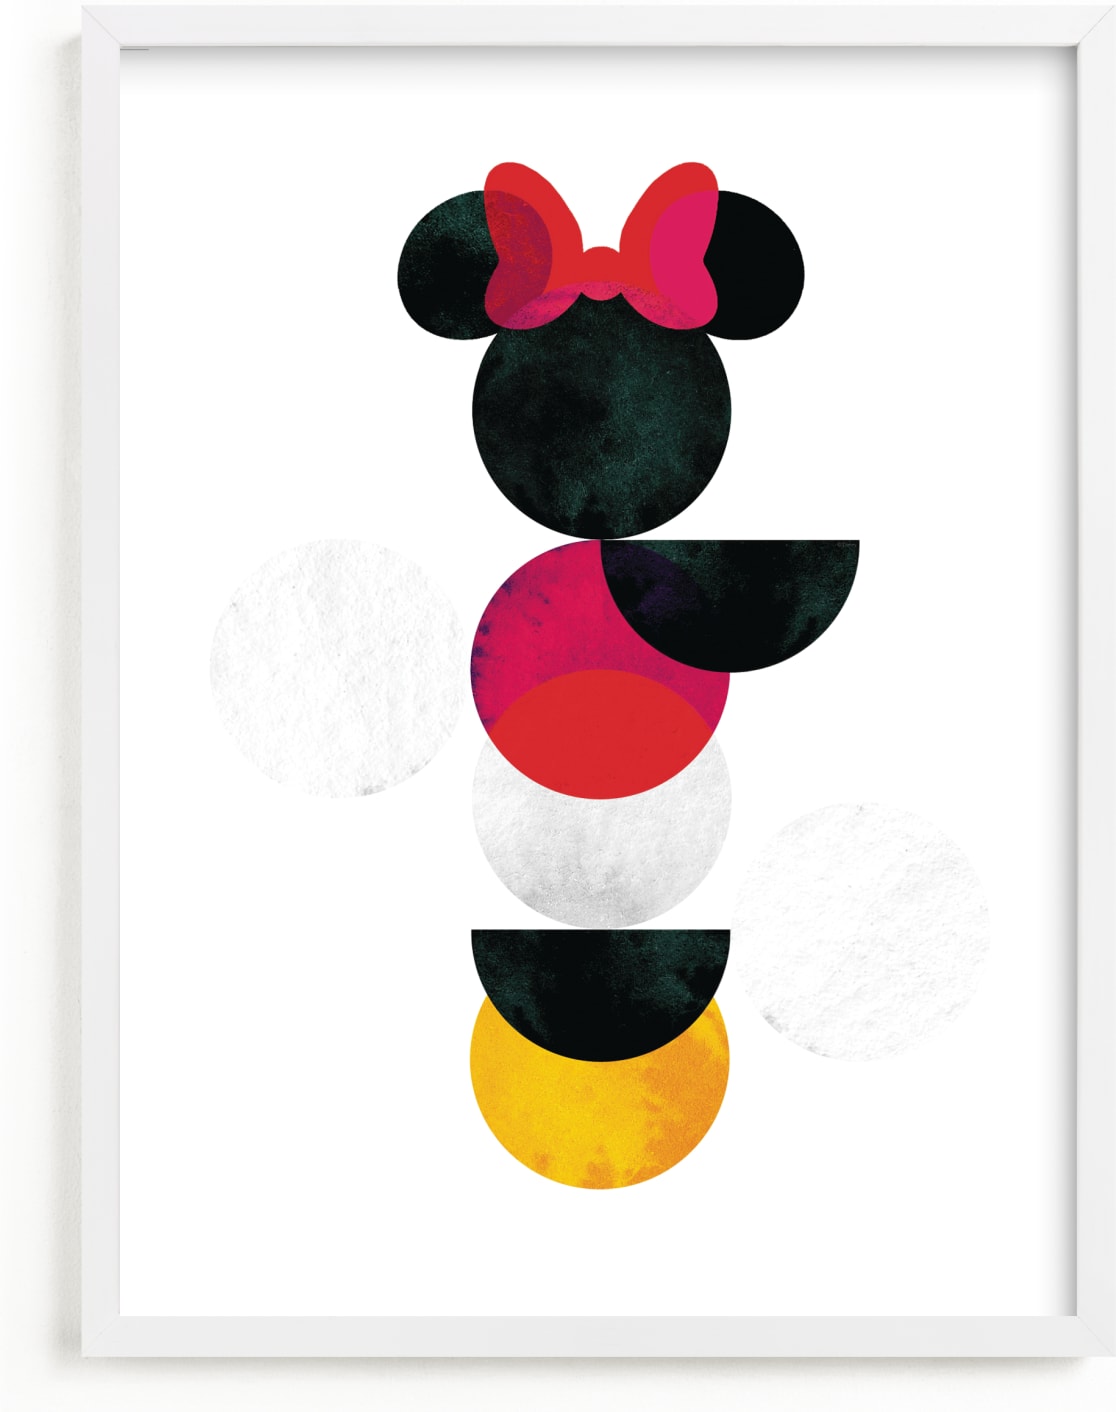 This is a yellow disney art by Anna Joseph called Disney Minimalist Minnie Mouse.